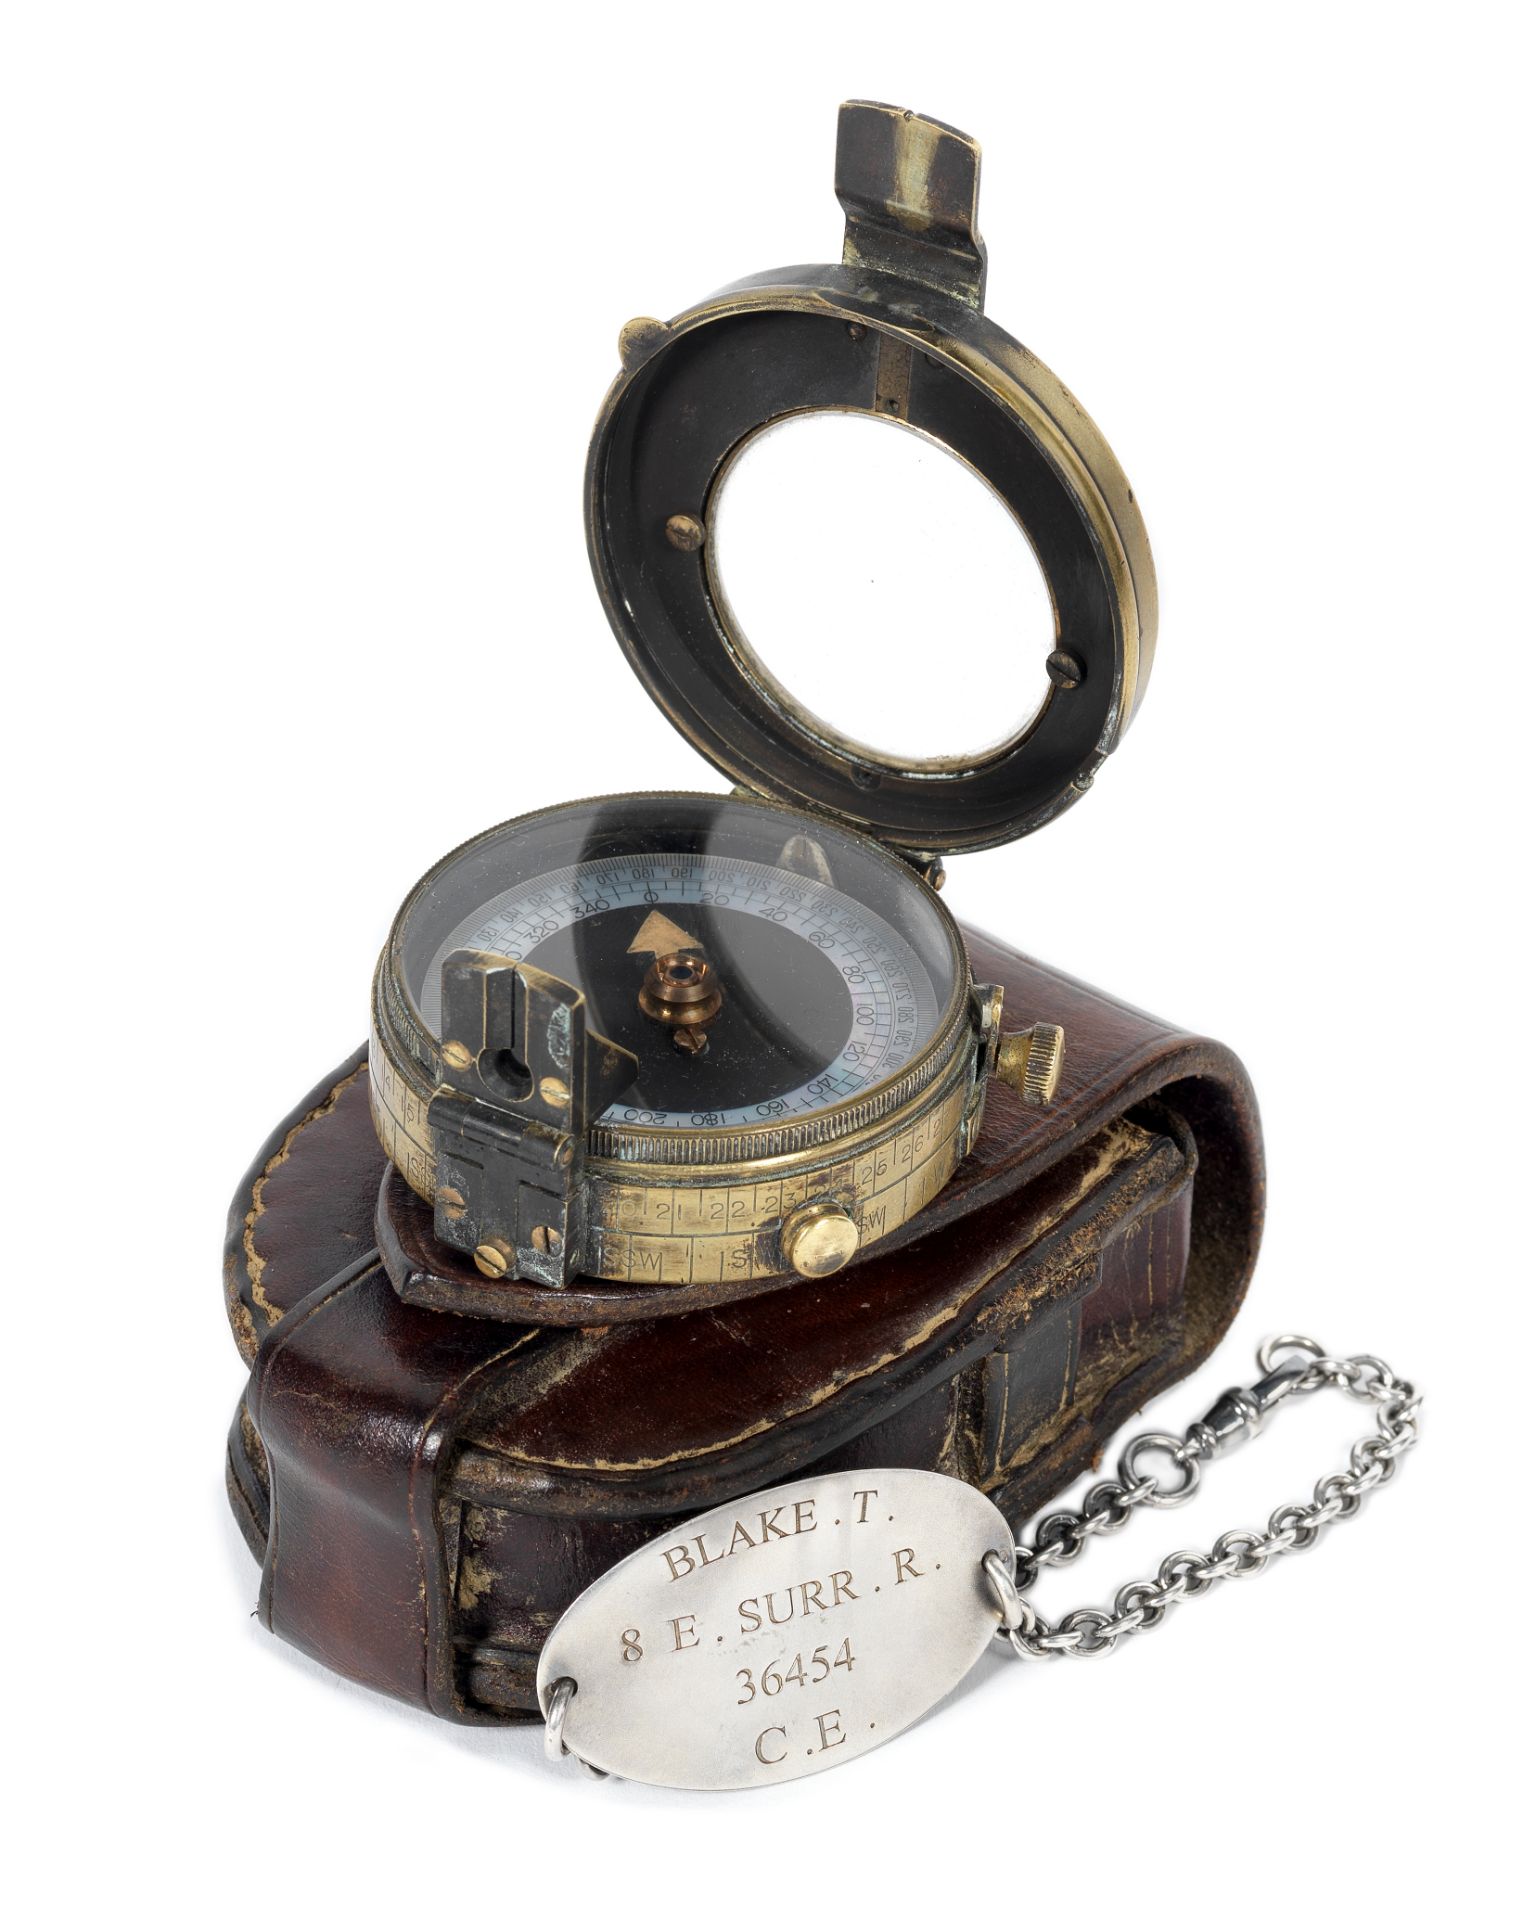 1917: A compass and identity bracelet as worn by Dean-Charles Chapman for his role as 'Lance Corp...